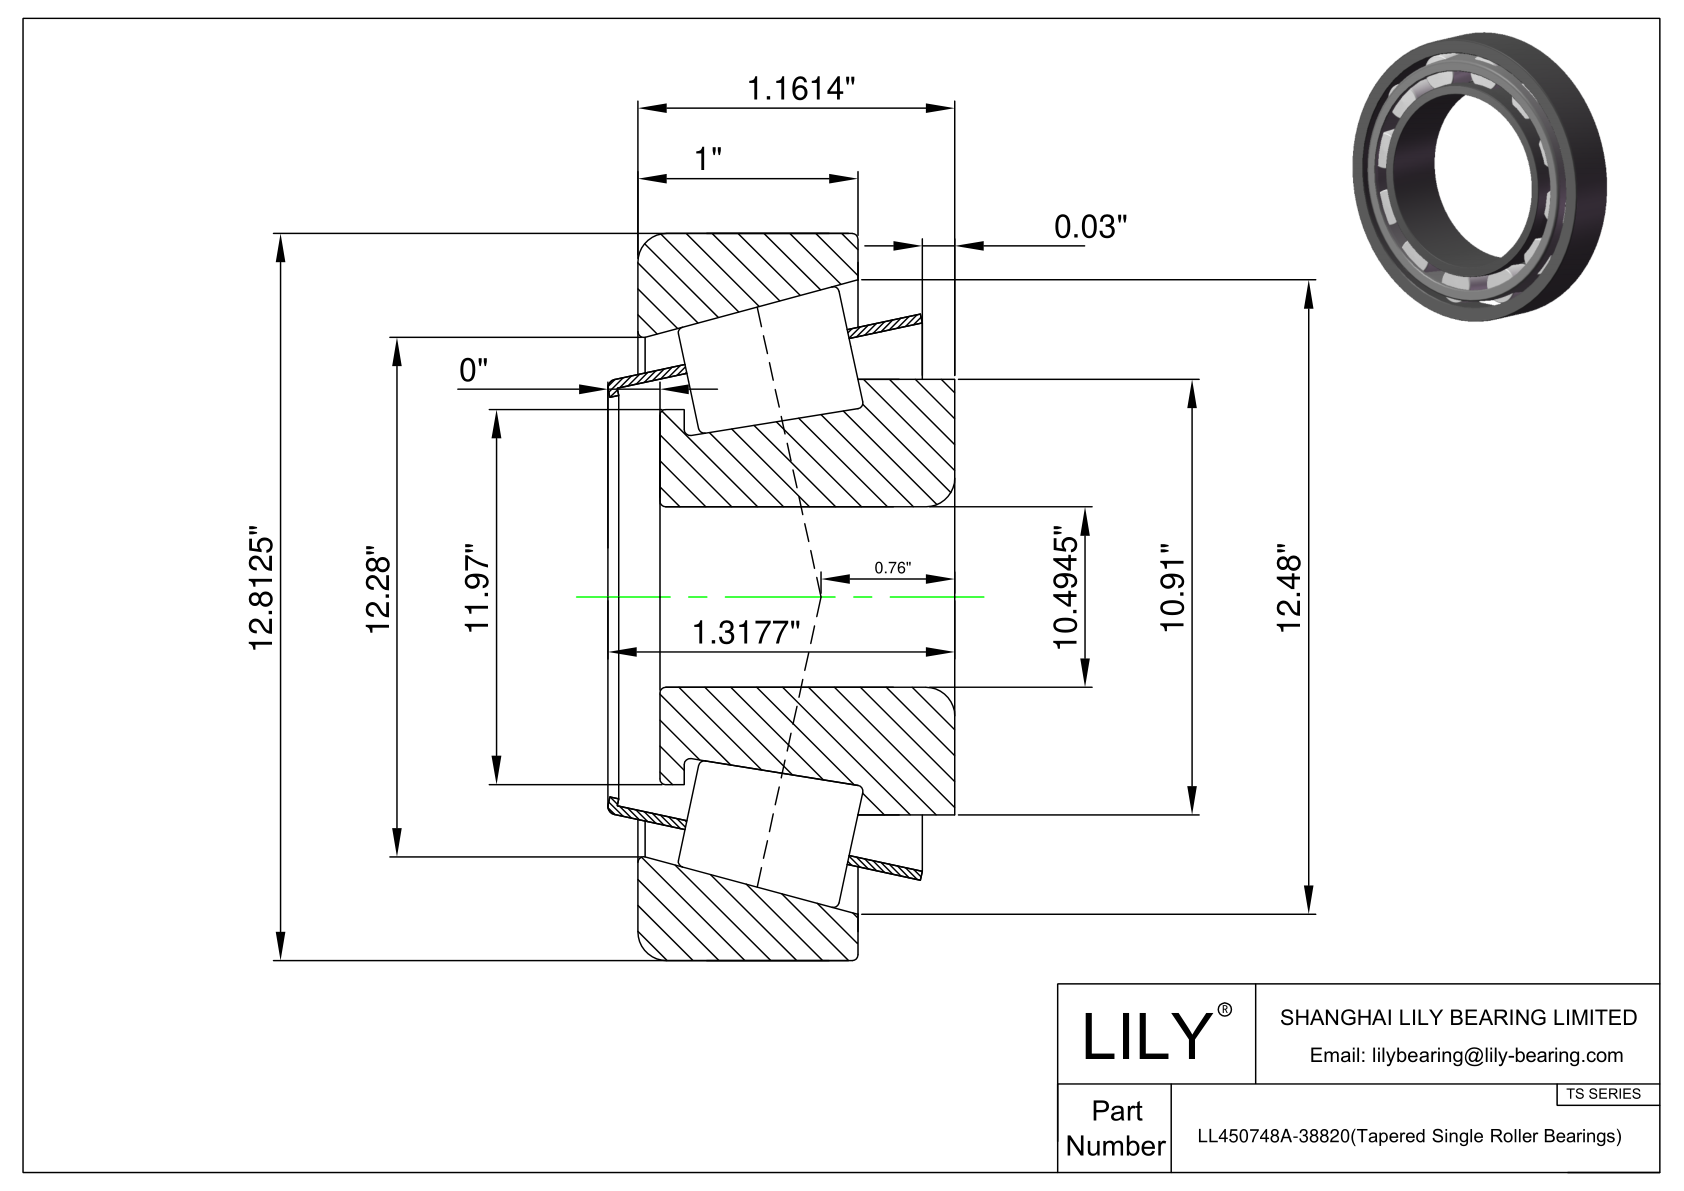 LL450748A-38820 TS (Tapered Single Roller Bearings) (Imperial) cad drawing